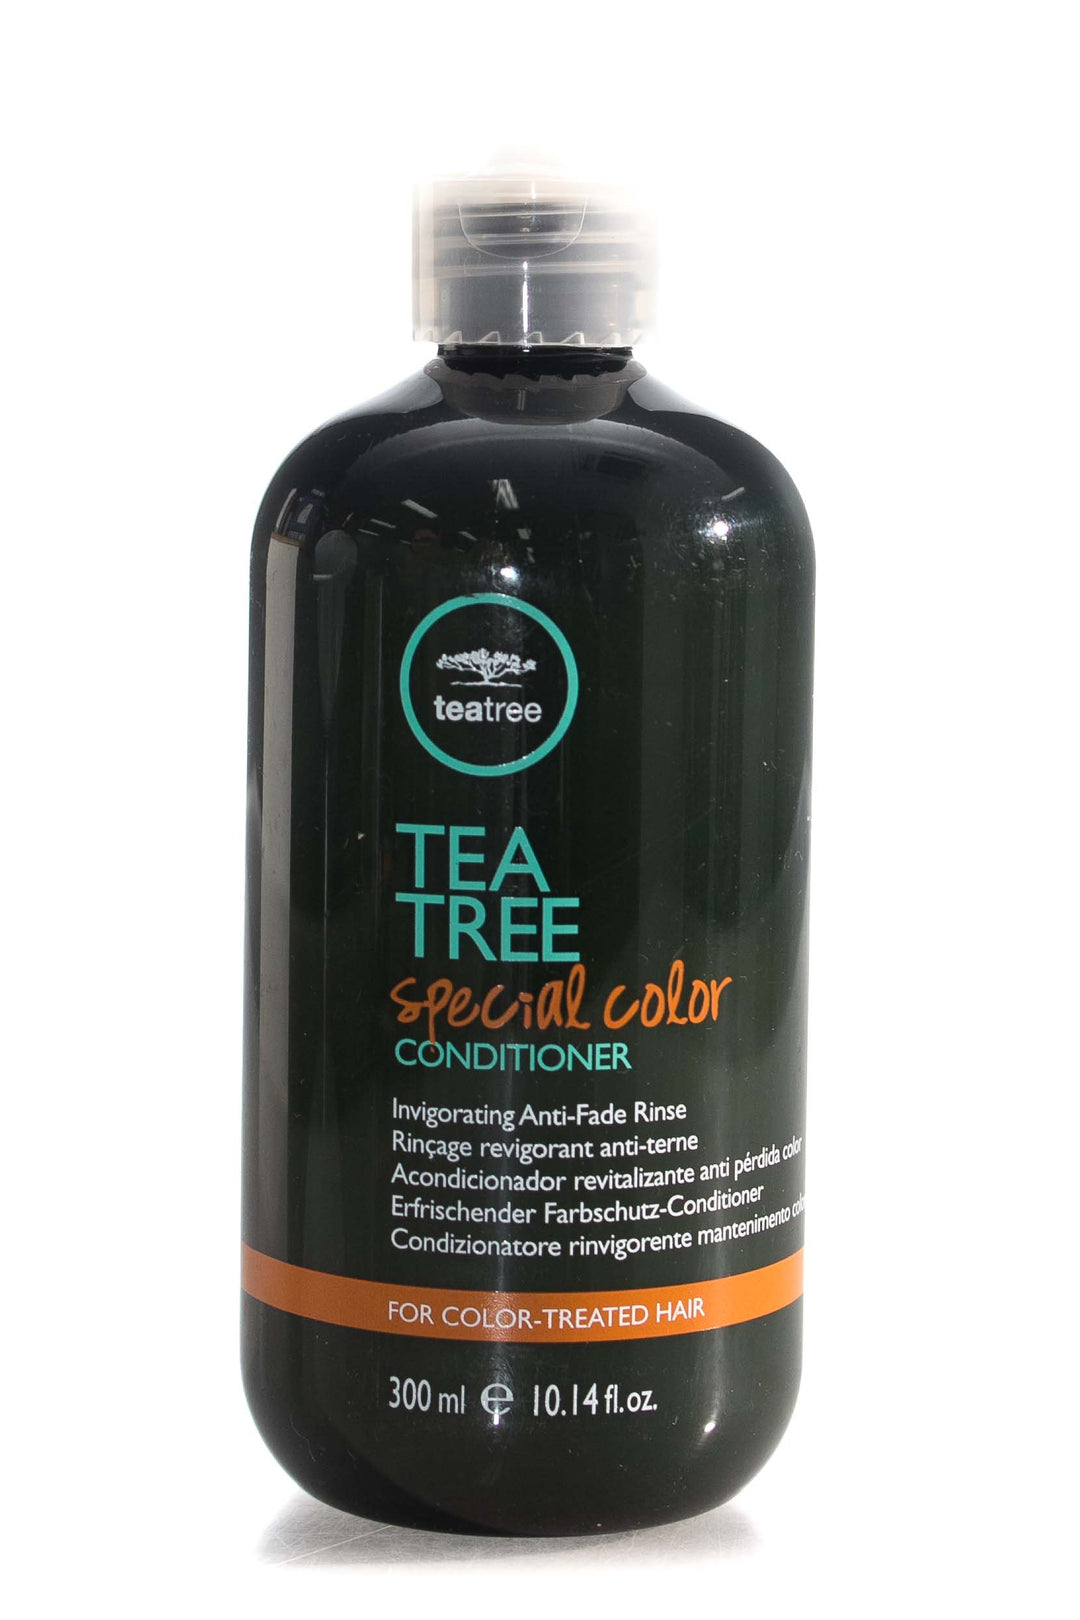 paul-mitchell-tea-tree-special-colour-conditioner-300ml